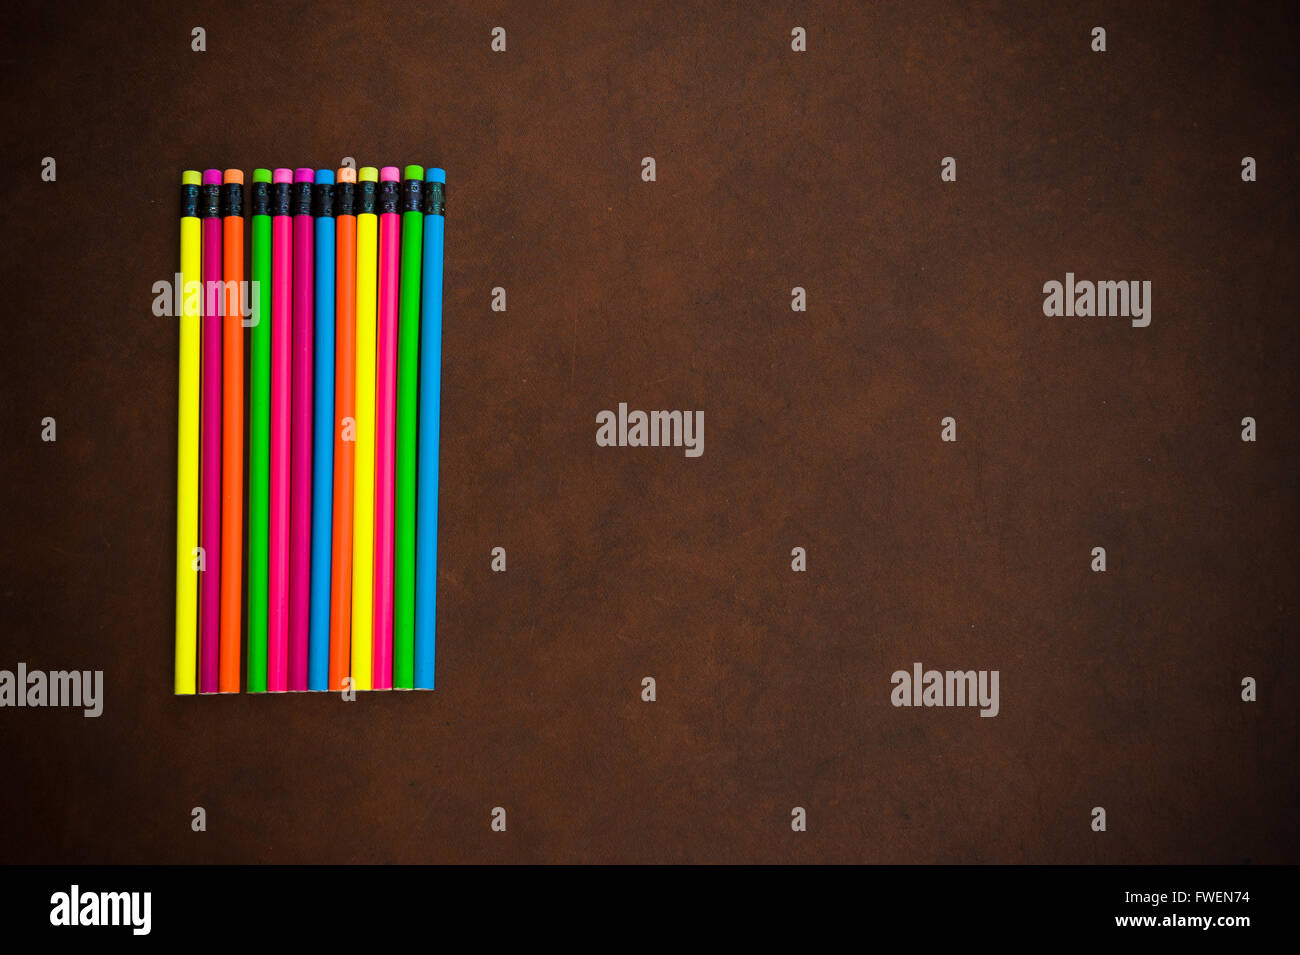 Wooden desktop with colorful pencil on the left side, red yellow, blue, green and purple Stock Photo